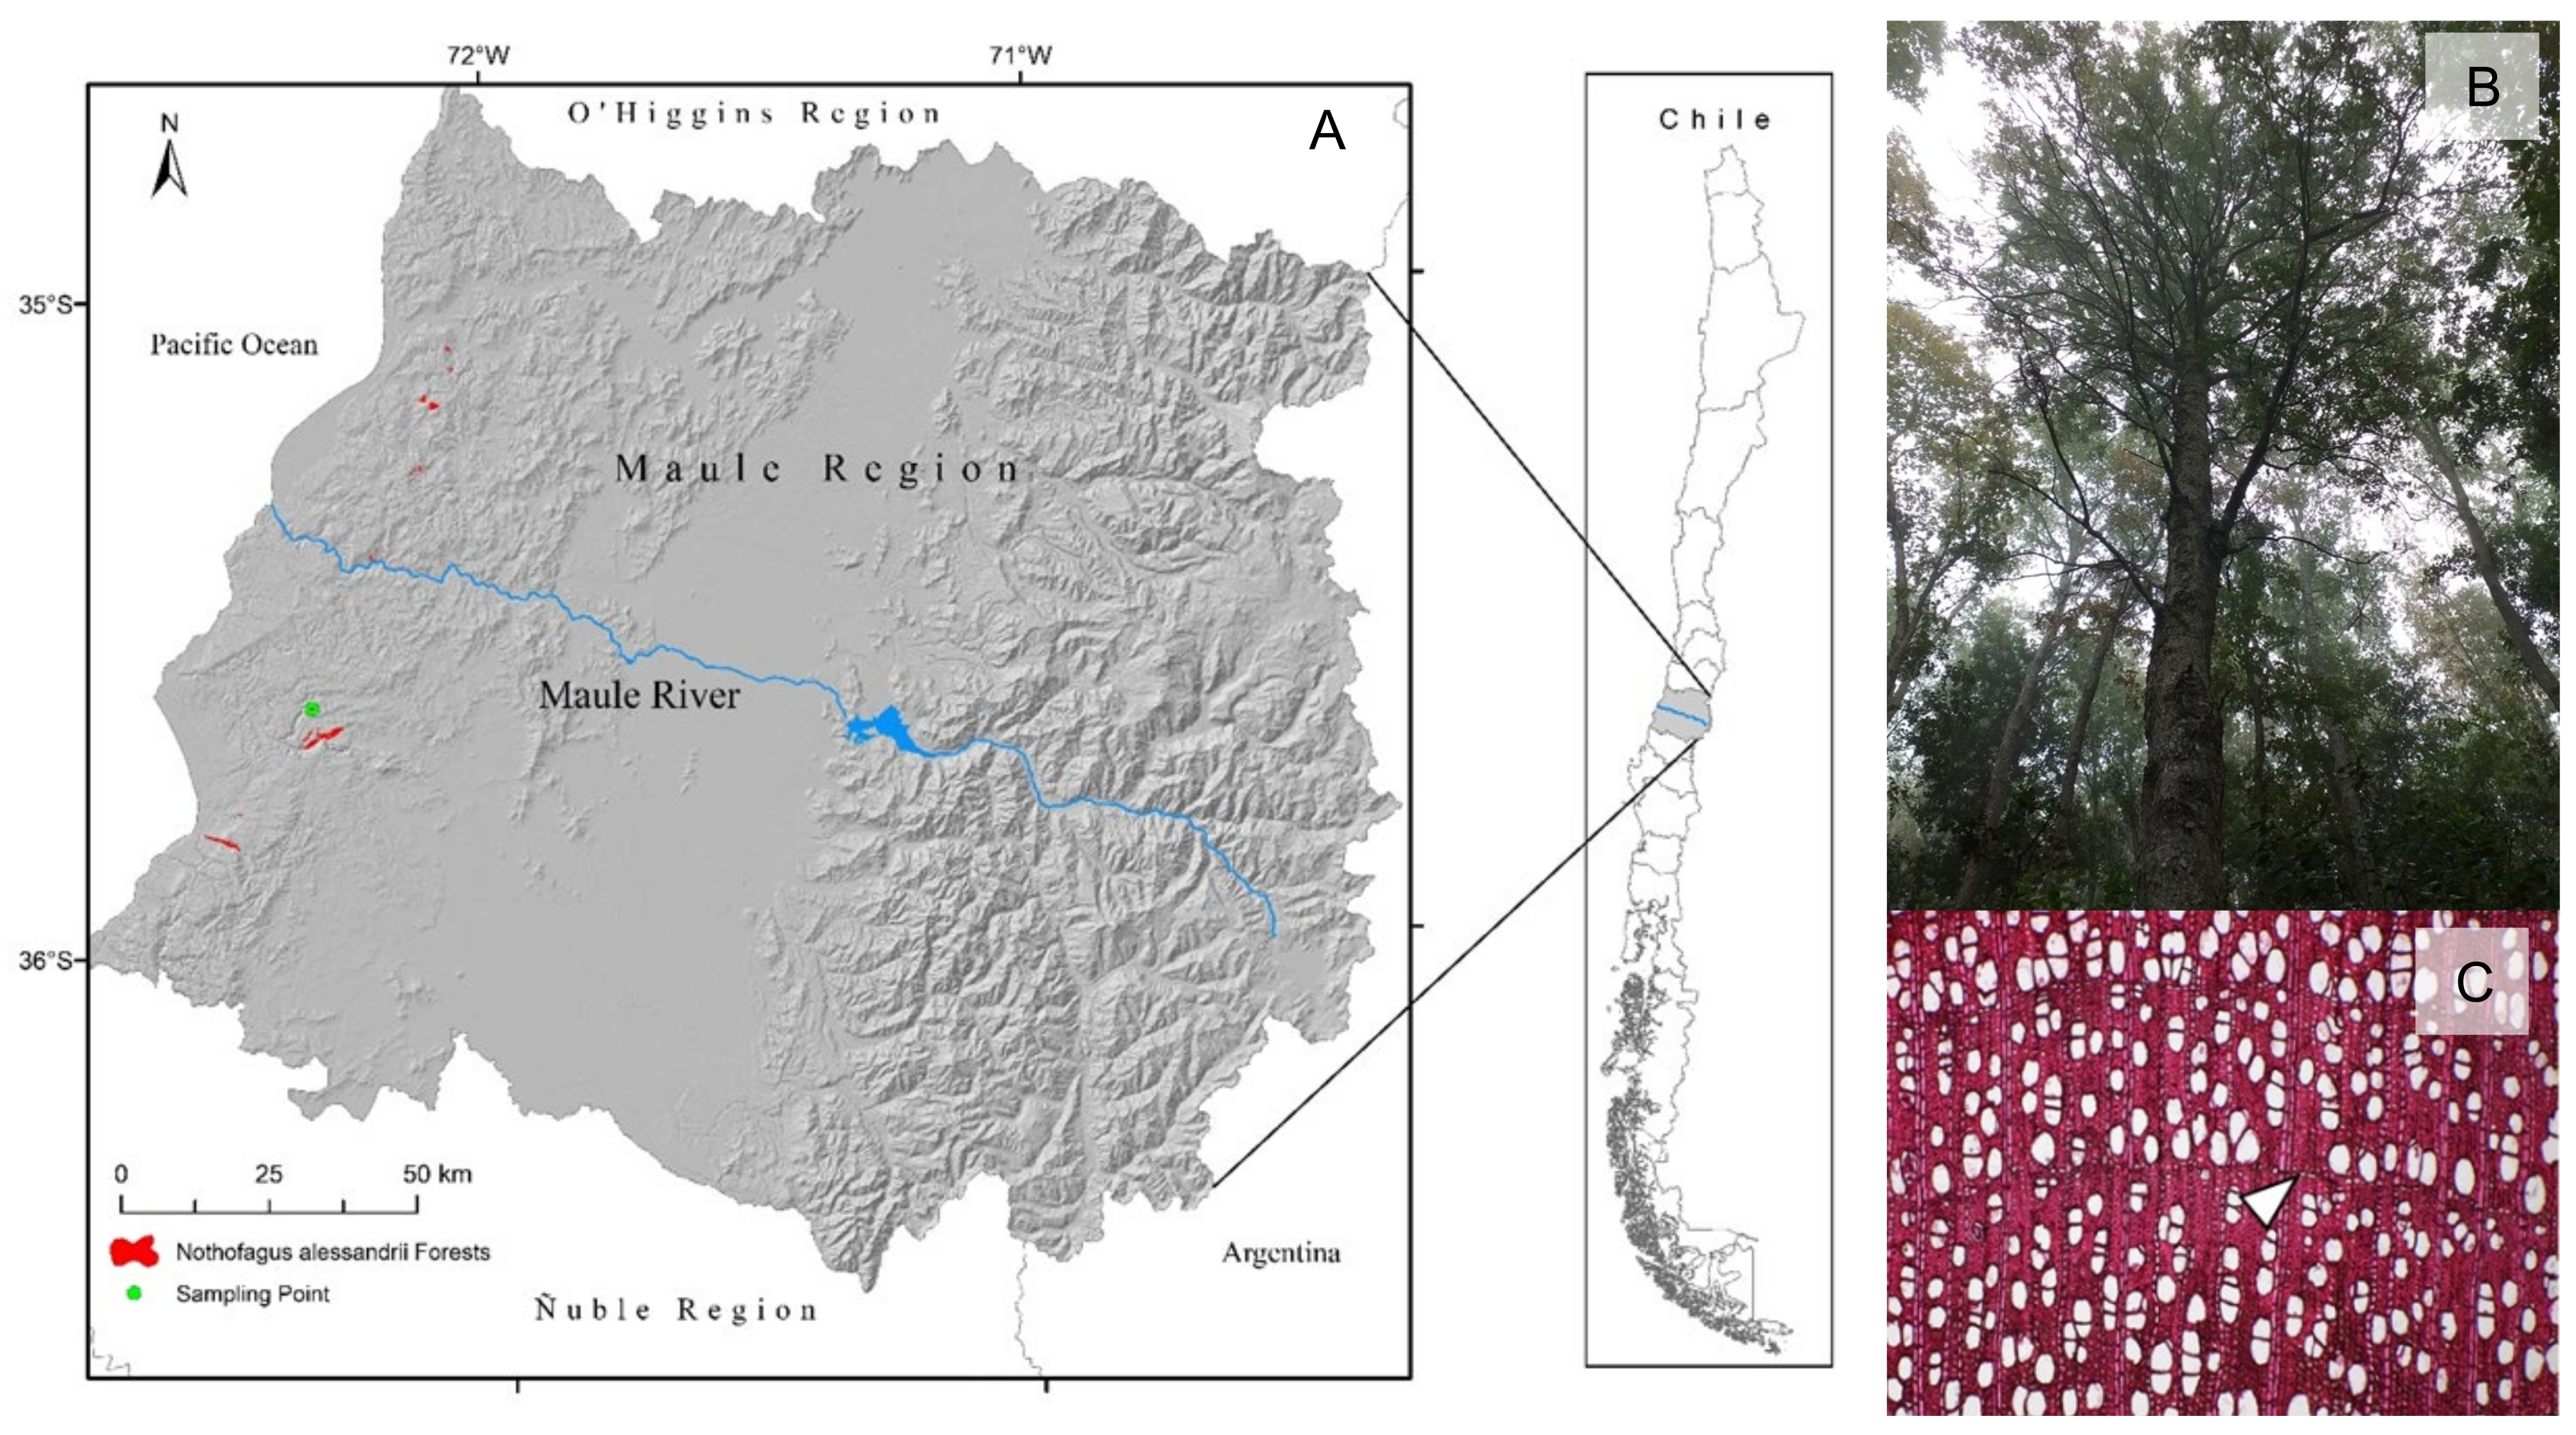 Forests | Free Full-Text | Reduced Rainfall Variability Reduces Growth of  Nothofagus alessandrii Espinosa (Nothofagaceae) in the Maule Region, Chile  | HTML